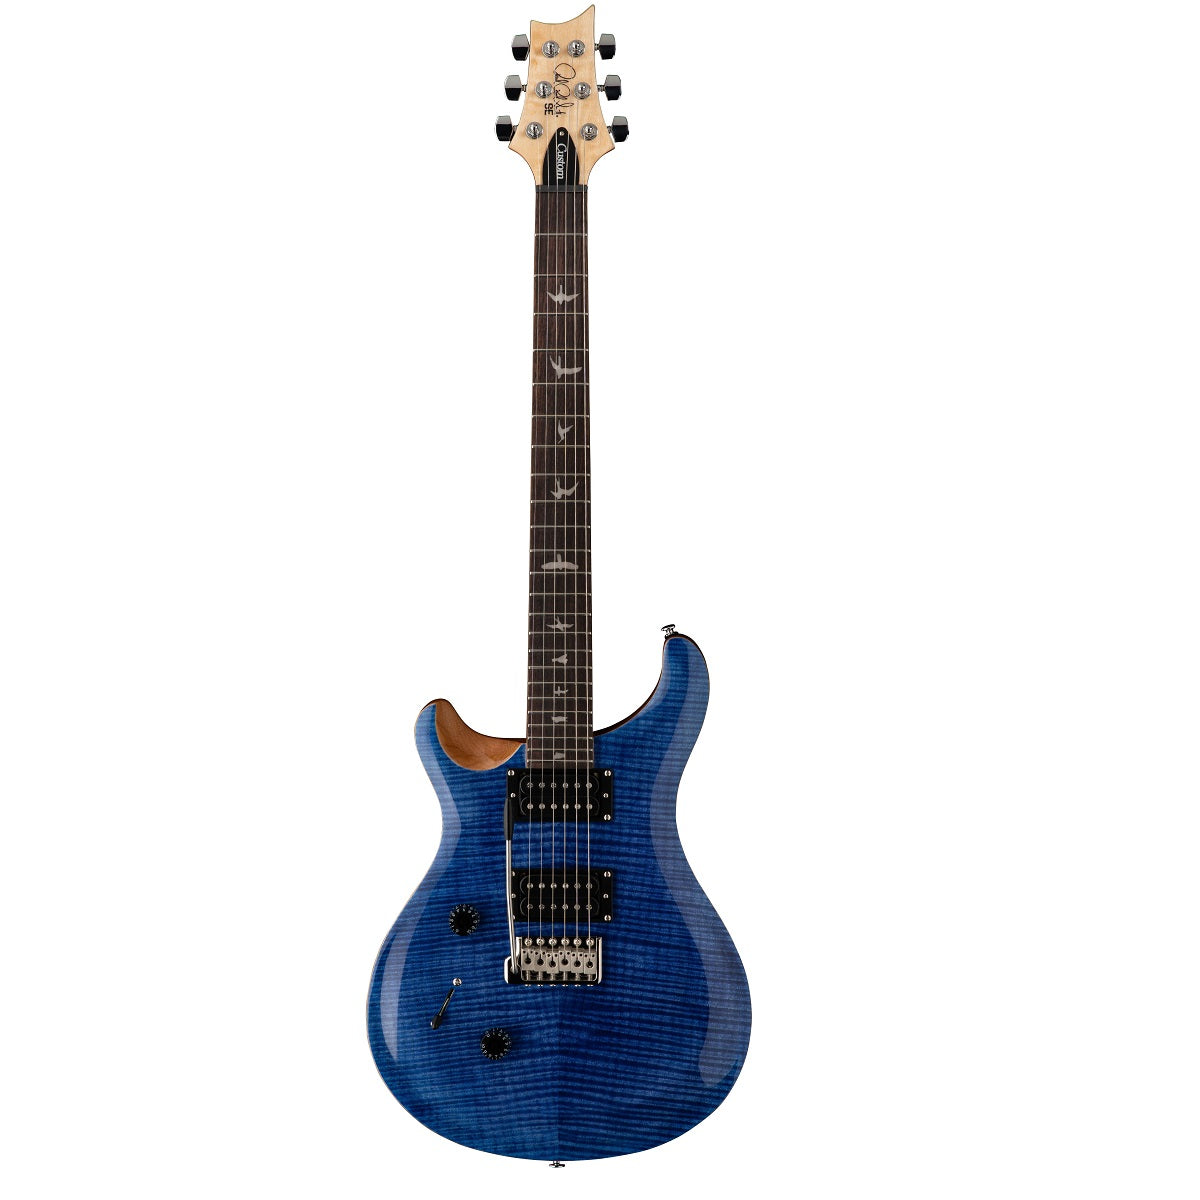 PRS Paul Reed Smith SE Custom 24 Electric Guitar Left Handed Faded Blue w/ Violin Top Carve